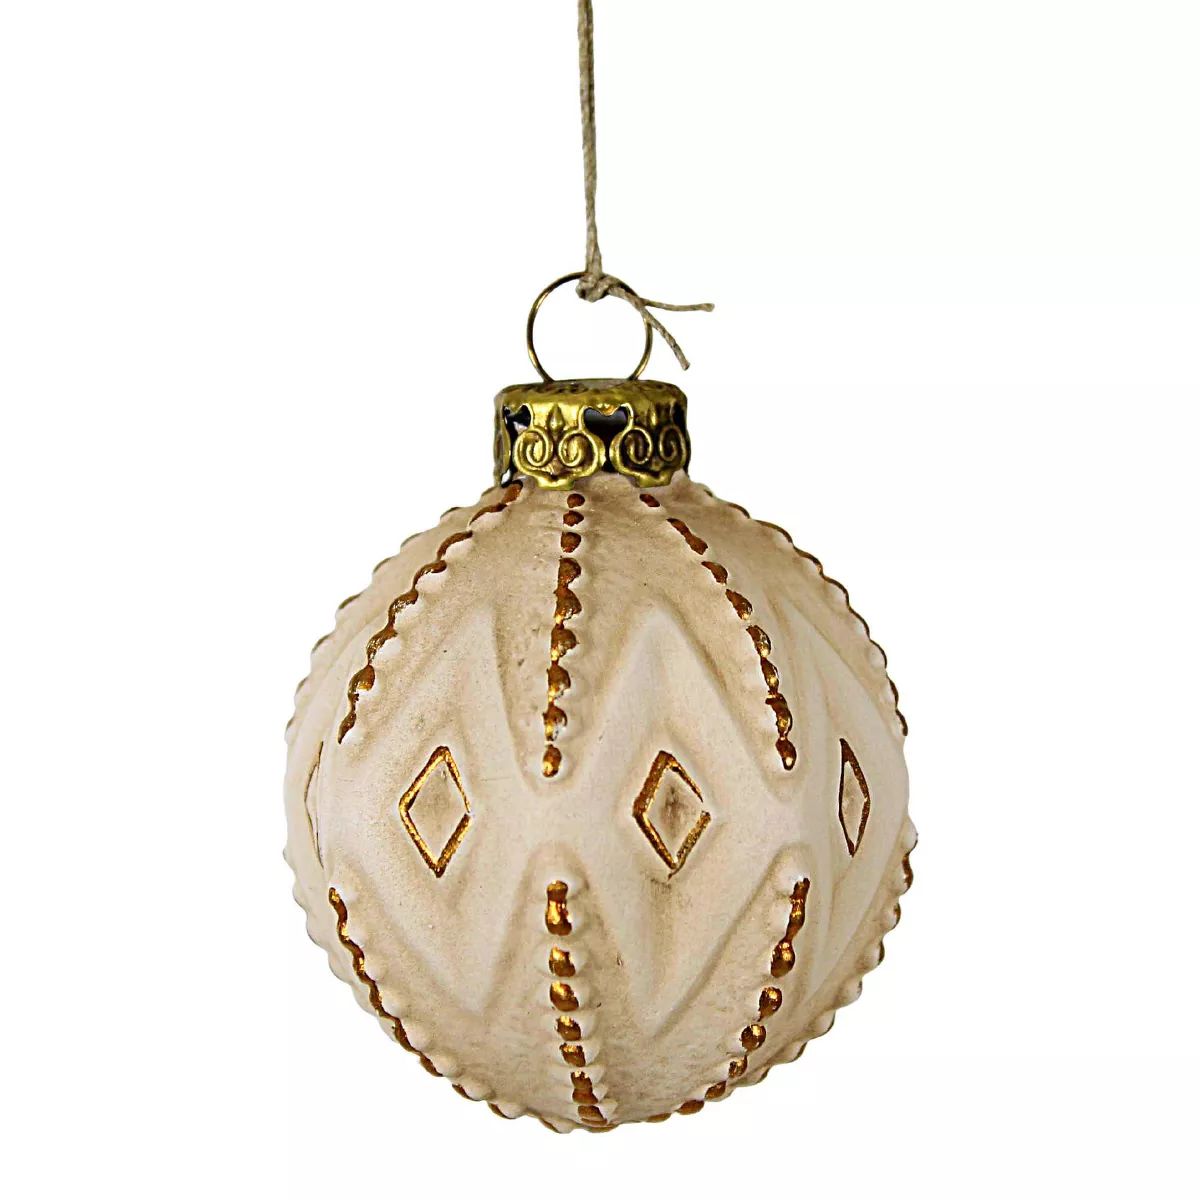 Marolin Christmasballs Ornament  -  One Ornament 2.25 Inches -  Vintage Look Gold  -   -  Paper  ... | Target